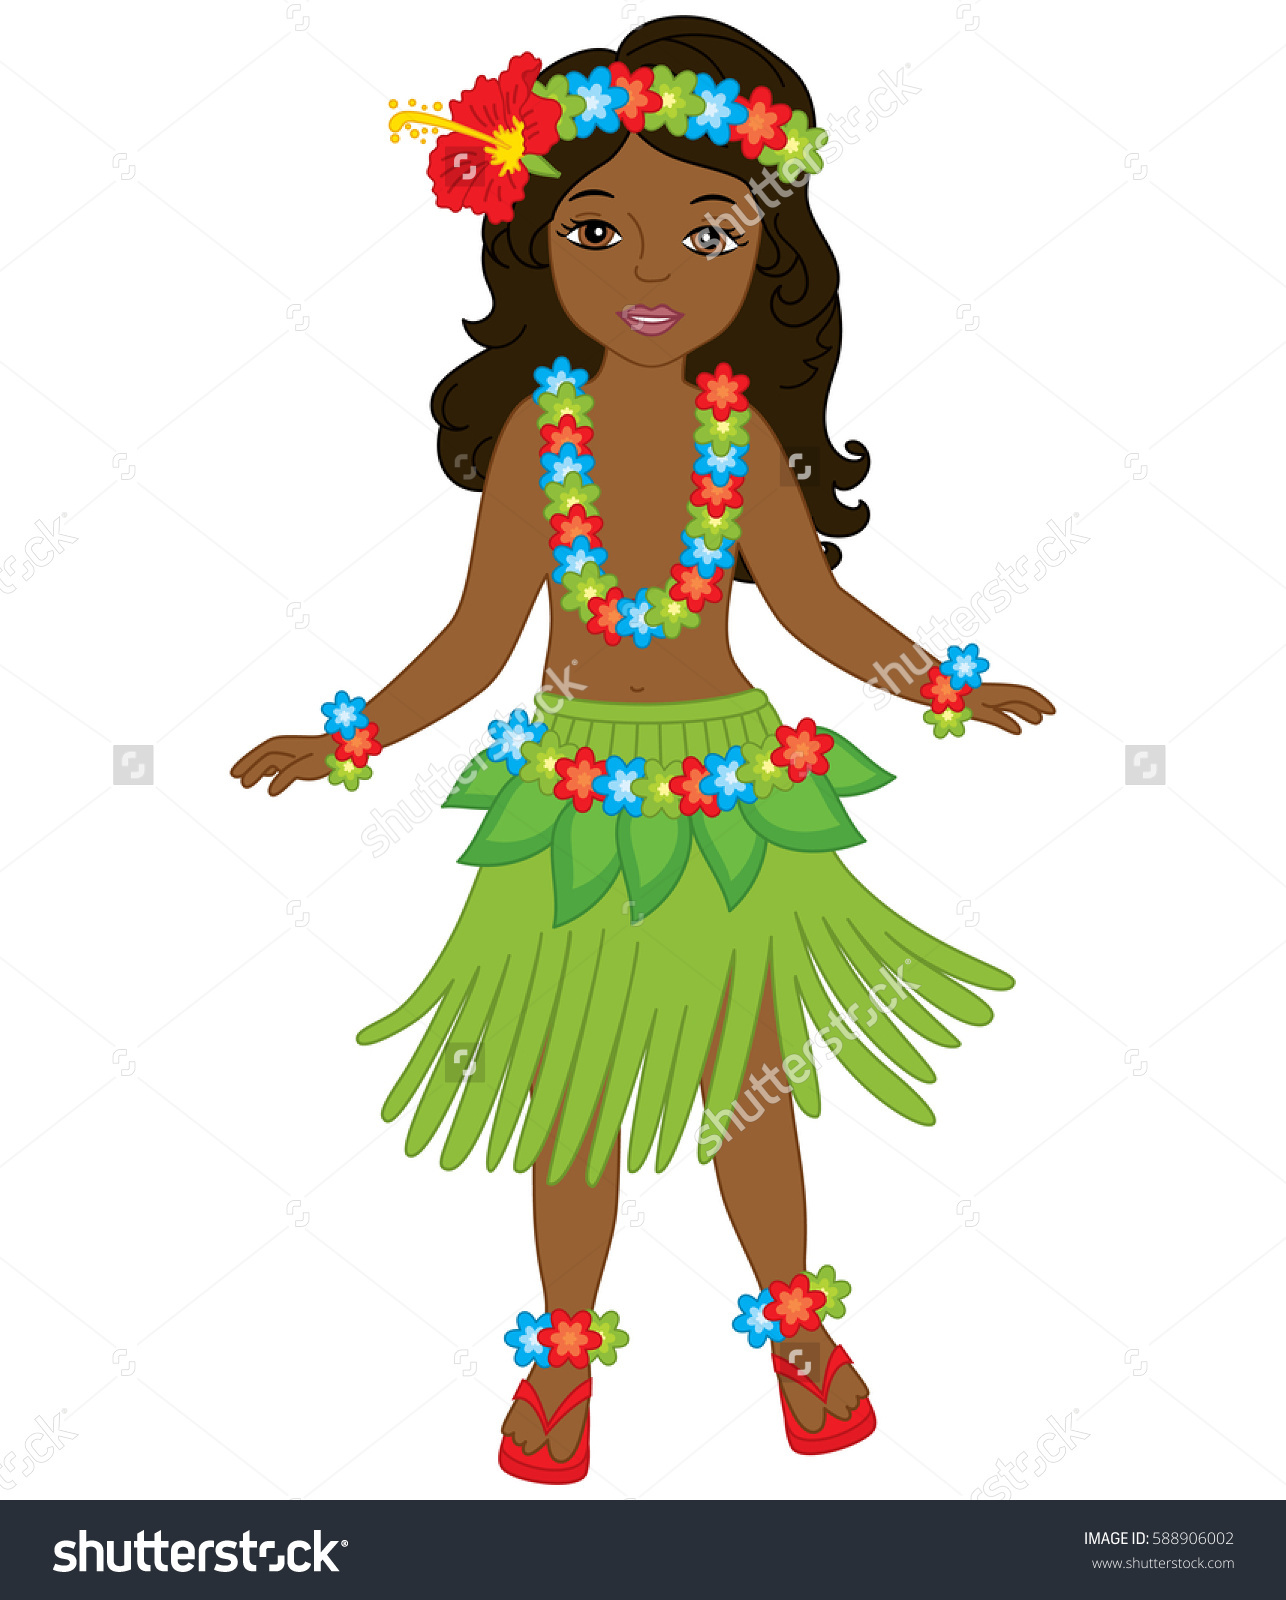 grass skirt pictures clip art free - photo #9